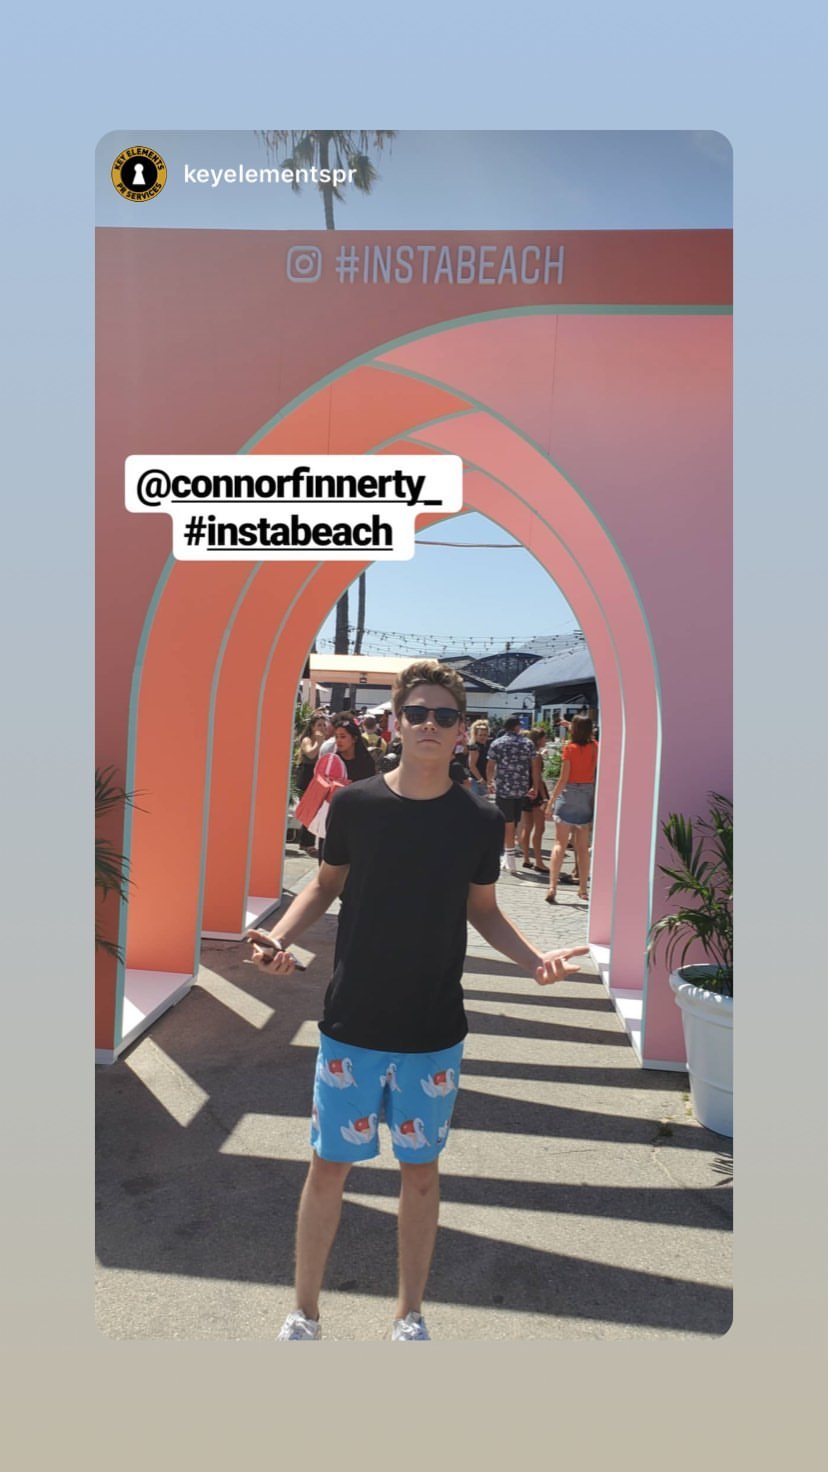 General photo of Connor Finnerty